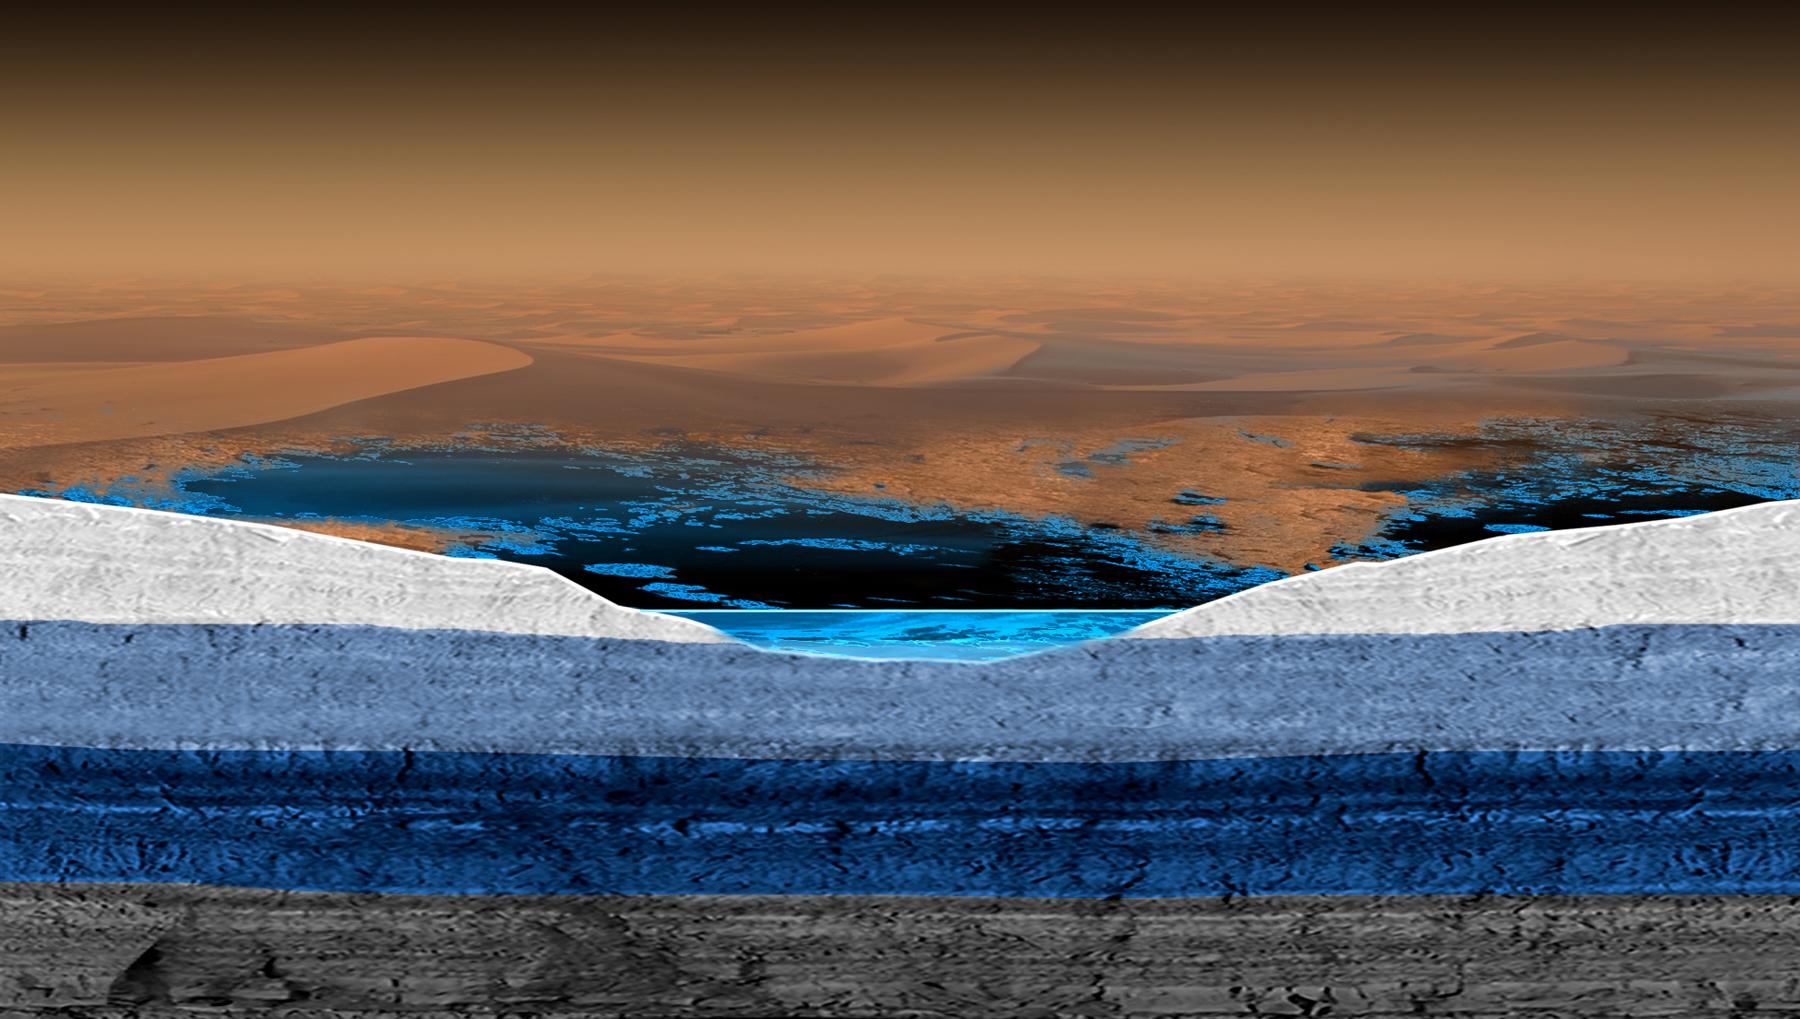 This artist's rendering shows a cross-section of the surface and subsurface of Saturn's moon Titan, with a possible model for the structure of underground liquid reservoirs there.